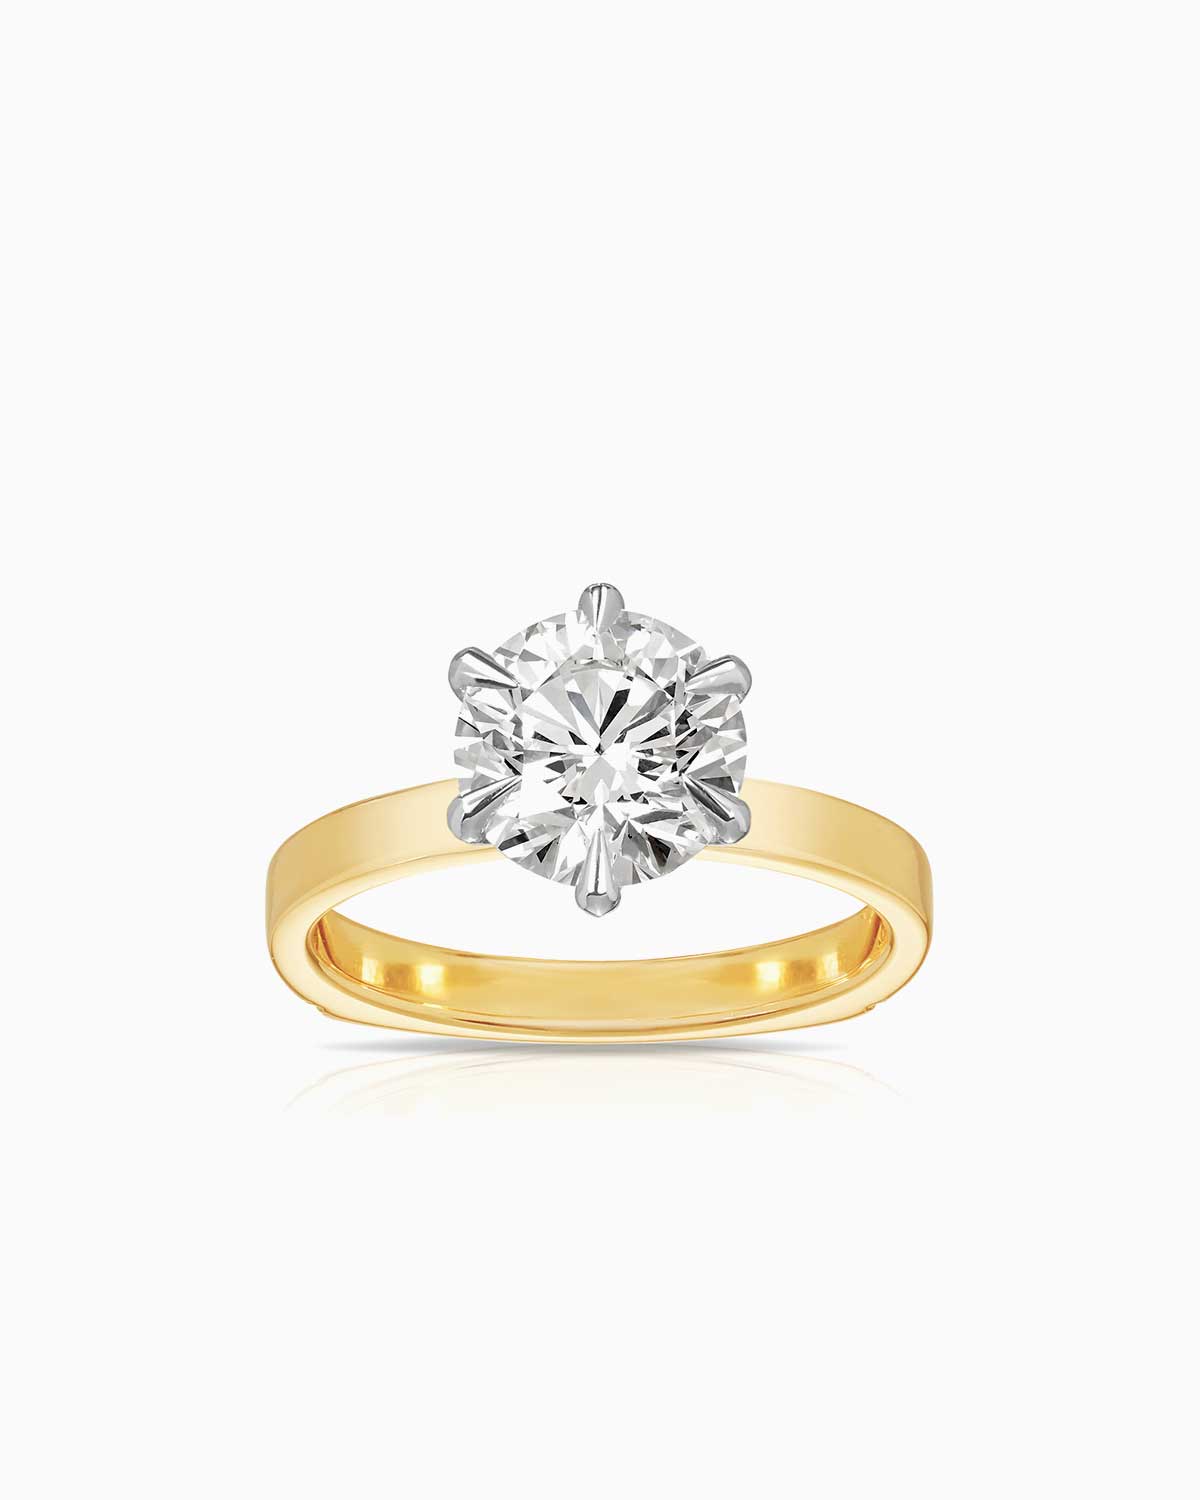 6 claw diamond solitaire engagement ring in 18 karat yellow gold by claude and me jewellery